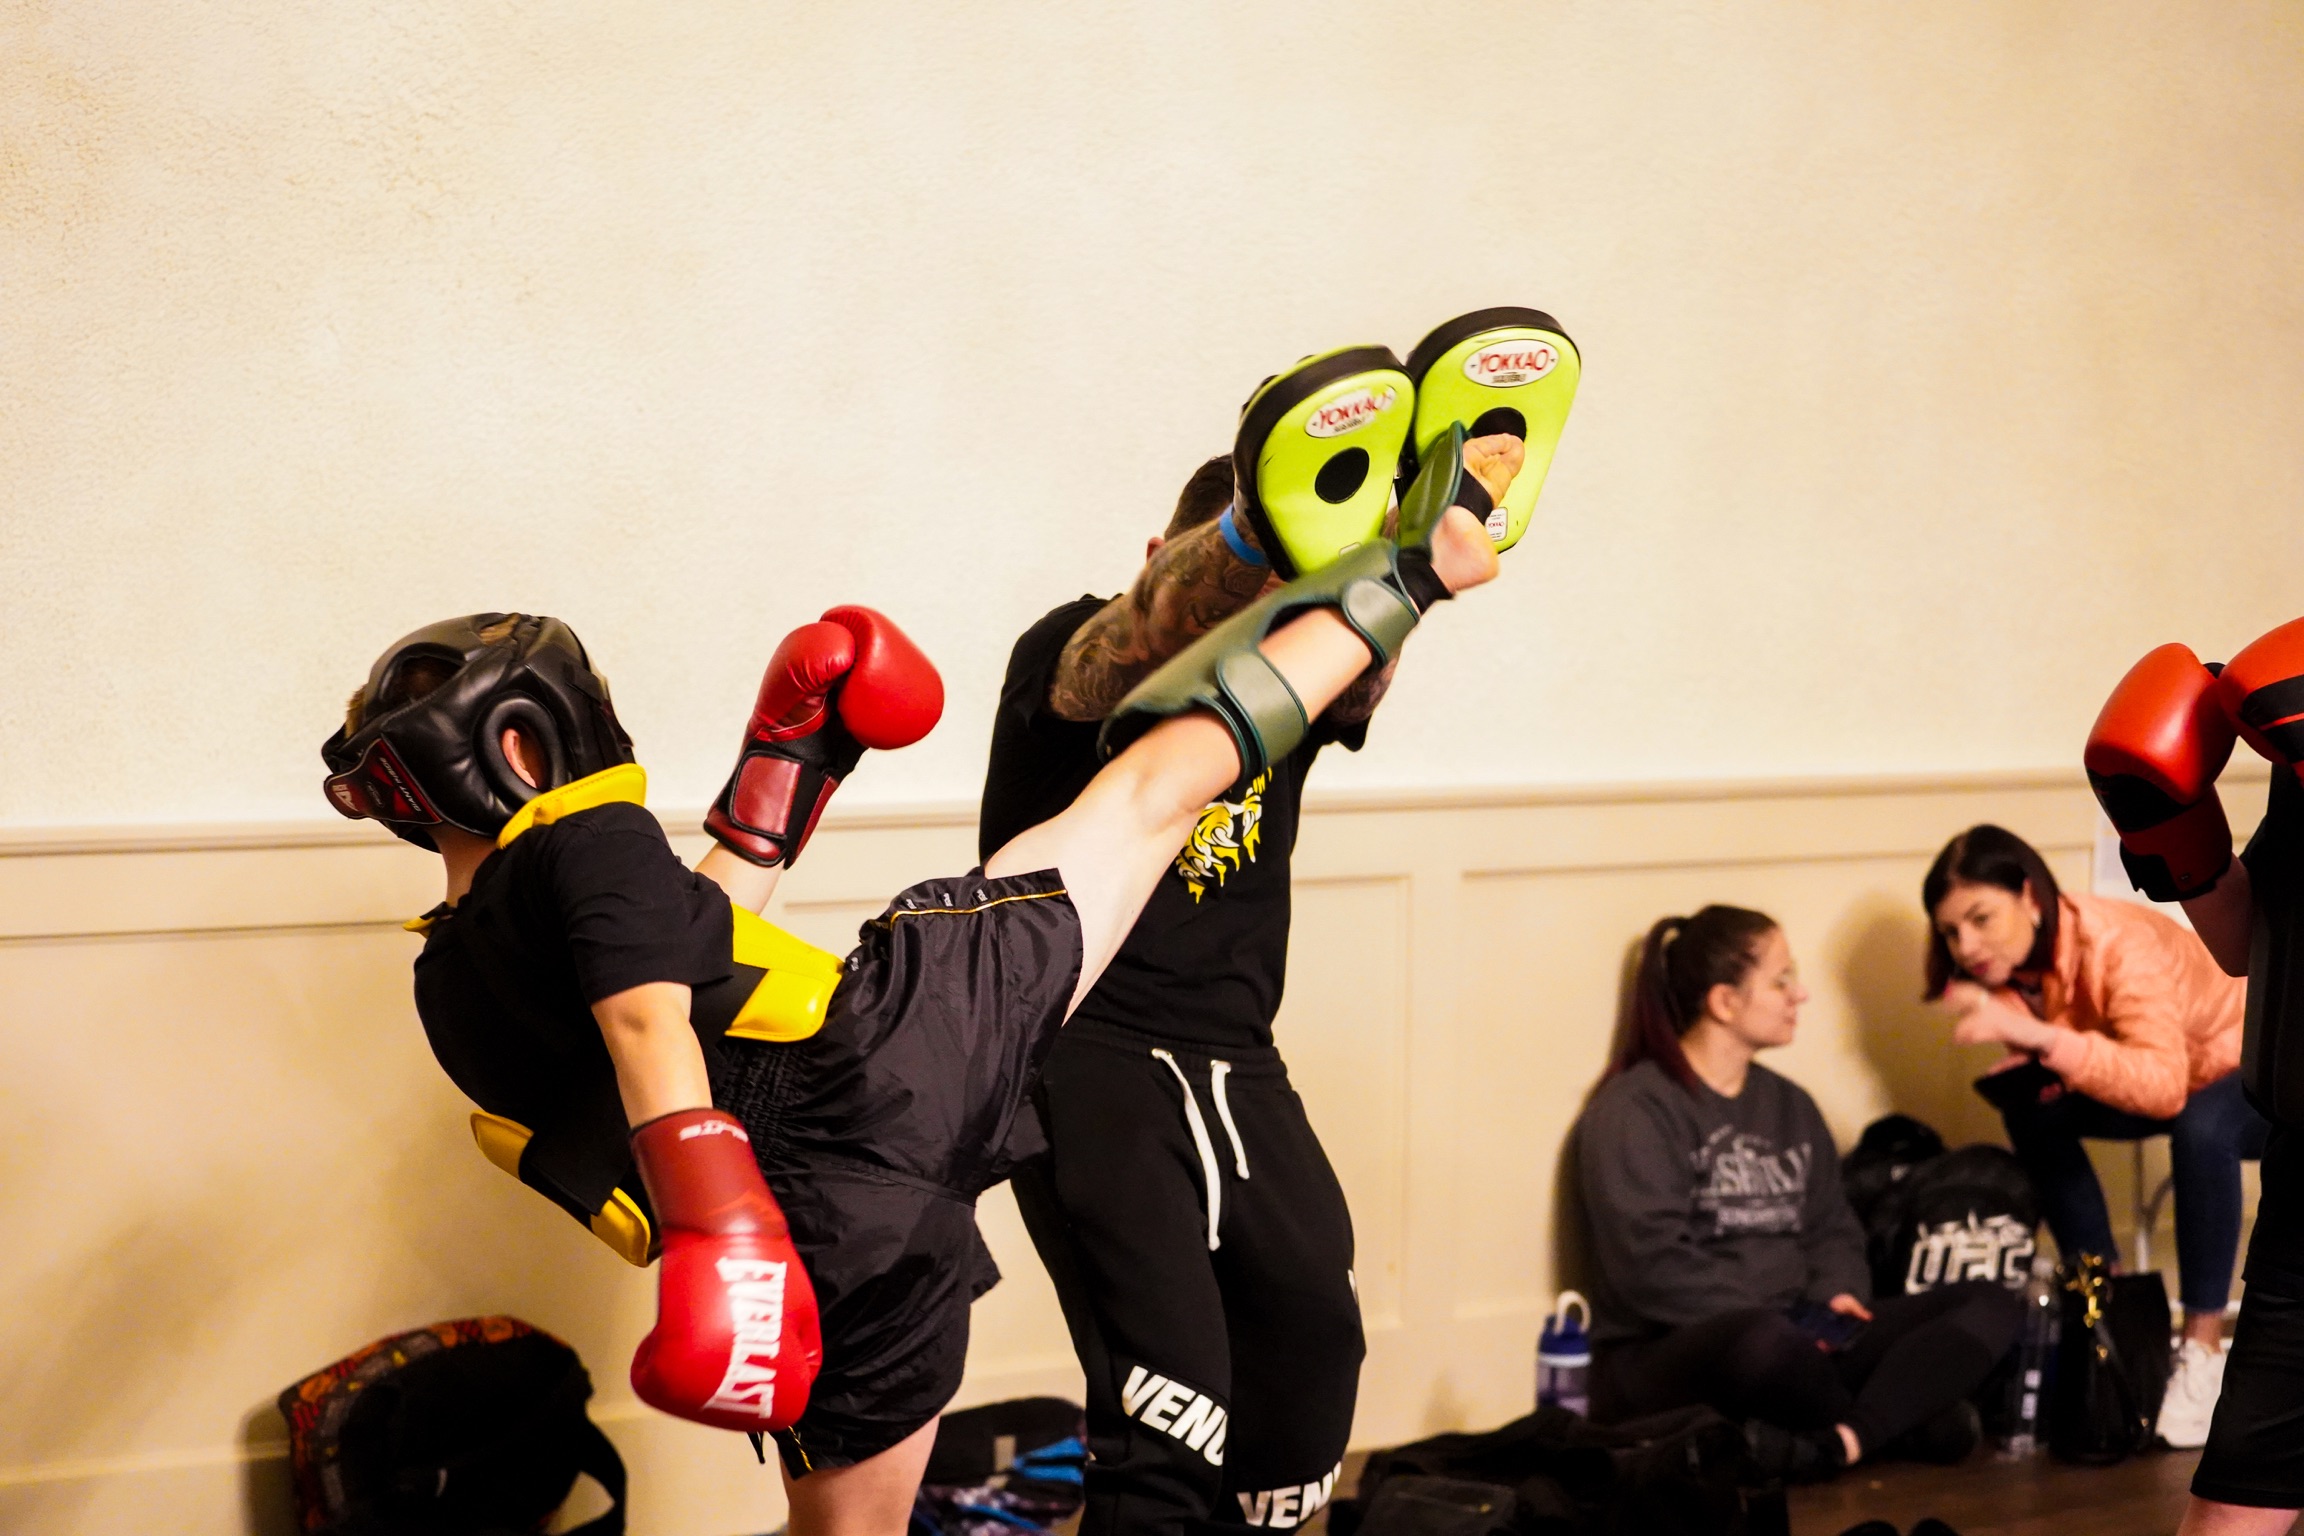 WildStyle Gym’s Freestyle Kickboxing Sessions for All Ages